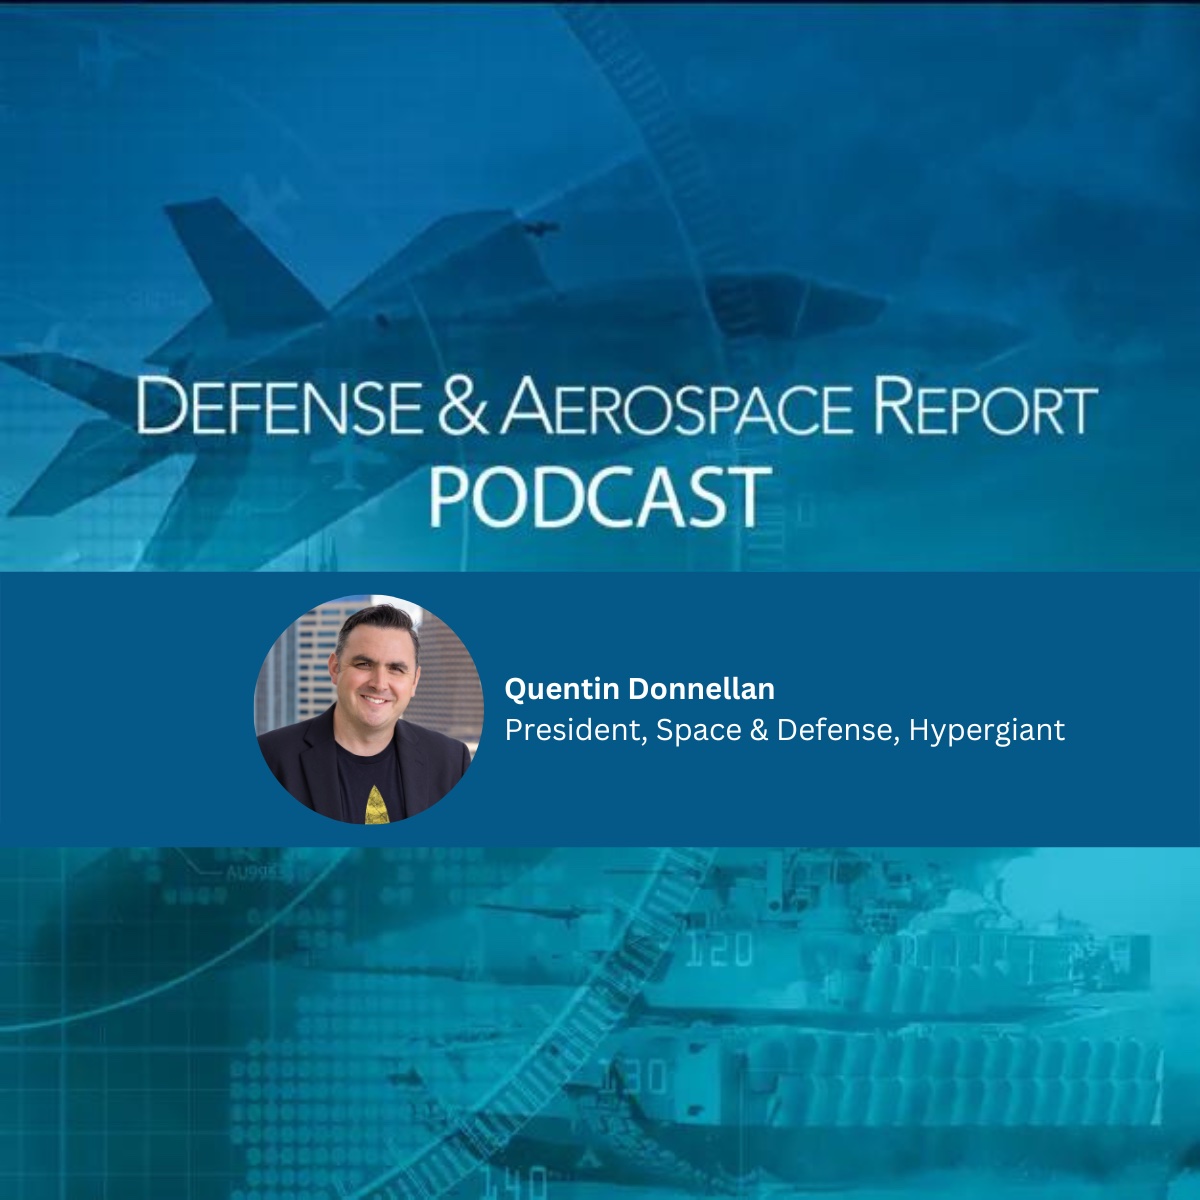 Defense and Aerospace Report: A feature on Hypergiant’s President of Space & Defense